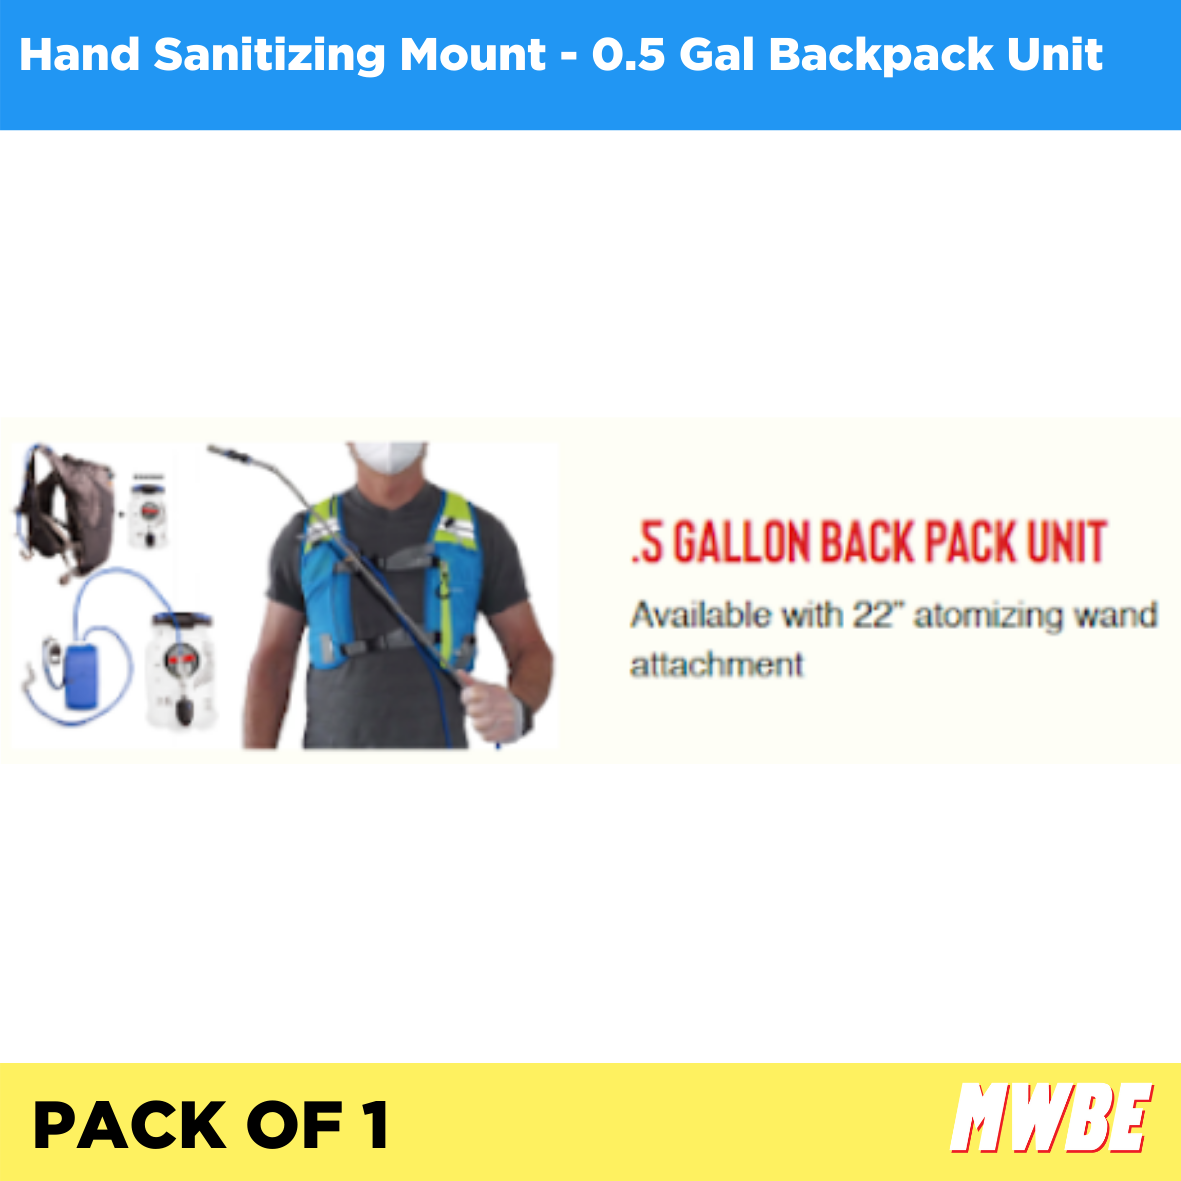 MWBE - 0.5 Gallon Backpack Unit with Atomizing Wand- Pack of 1 (Listing ID: 6617457623109)